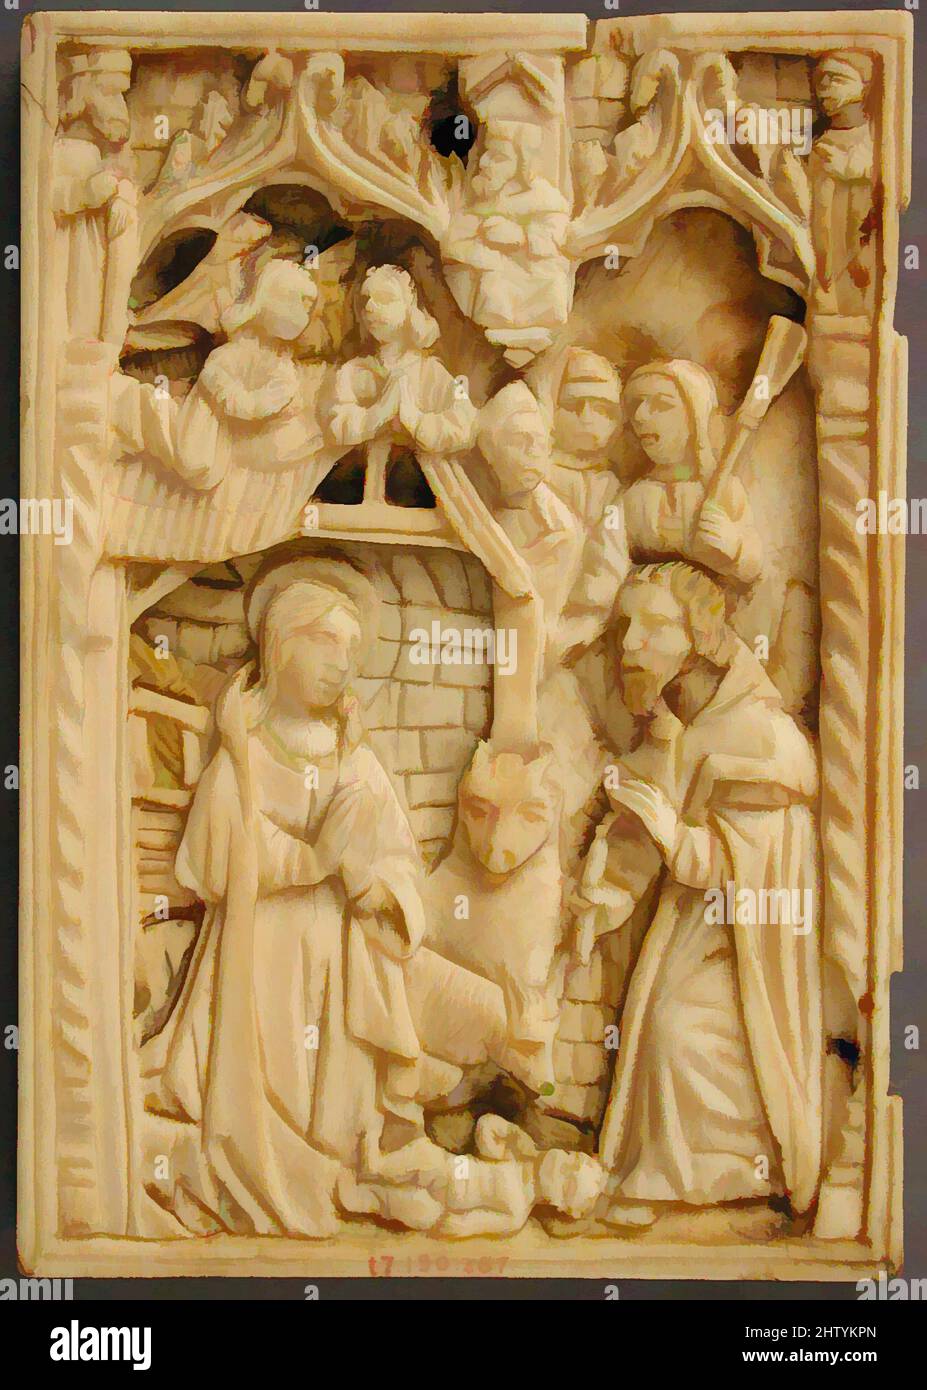 Art inspired by Left Wing of a Diptych, 15th century, Franco-Netherlandish, Ivory with small traces of polychromy, Overall: 4 5/16 x 3 x 1/4in. (10.9 x 7.6 x 0.7cm), Ivories, Classic works modernized by Artotop with a splash of modernity. Shapes, color and value, eye-catching visual impact on art. Emotions through freedom of artworks in a contemporary way. A timeless message pursuing a wildly creative new direction. Artists turning to the digital medium and creating the Artotop NFT Stock Photo